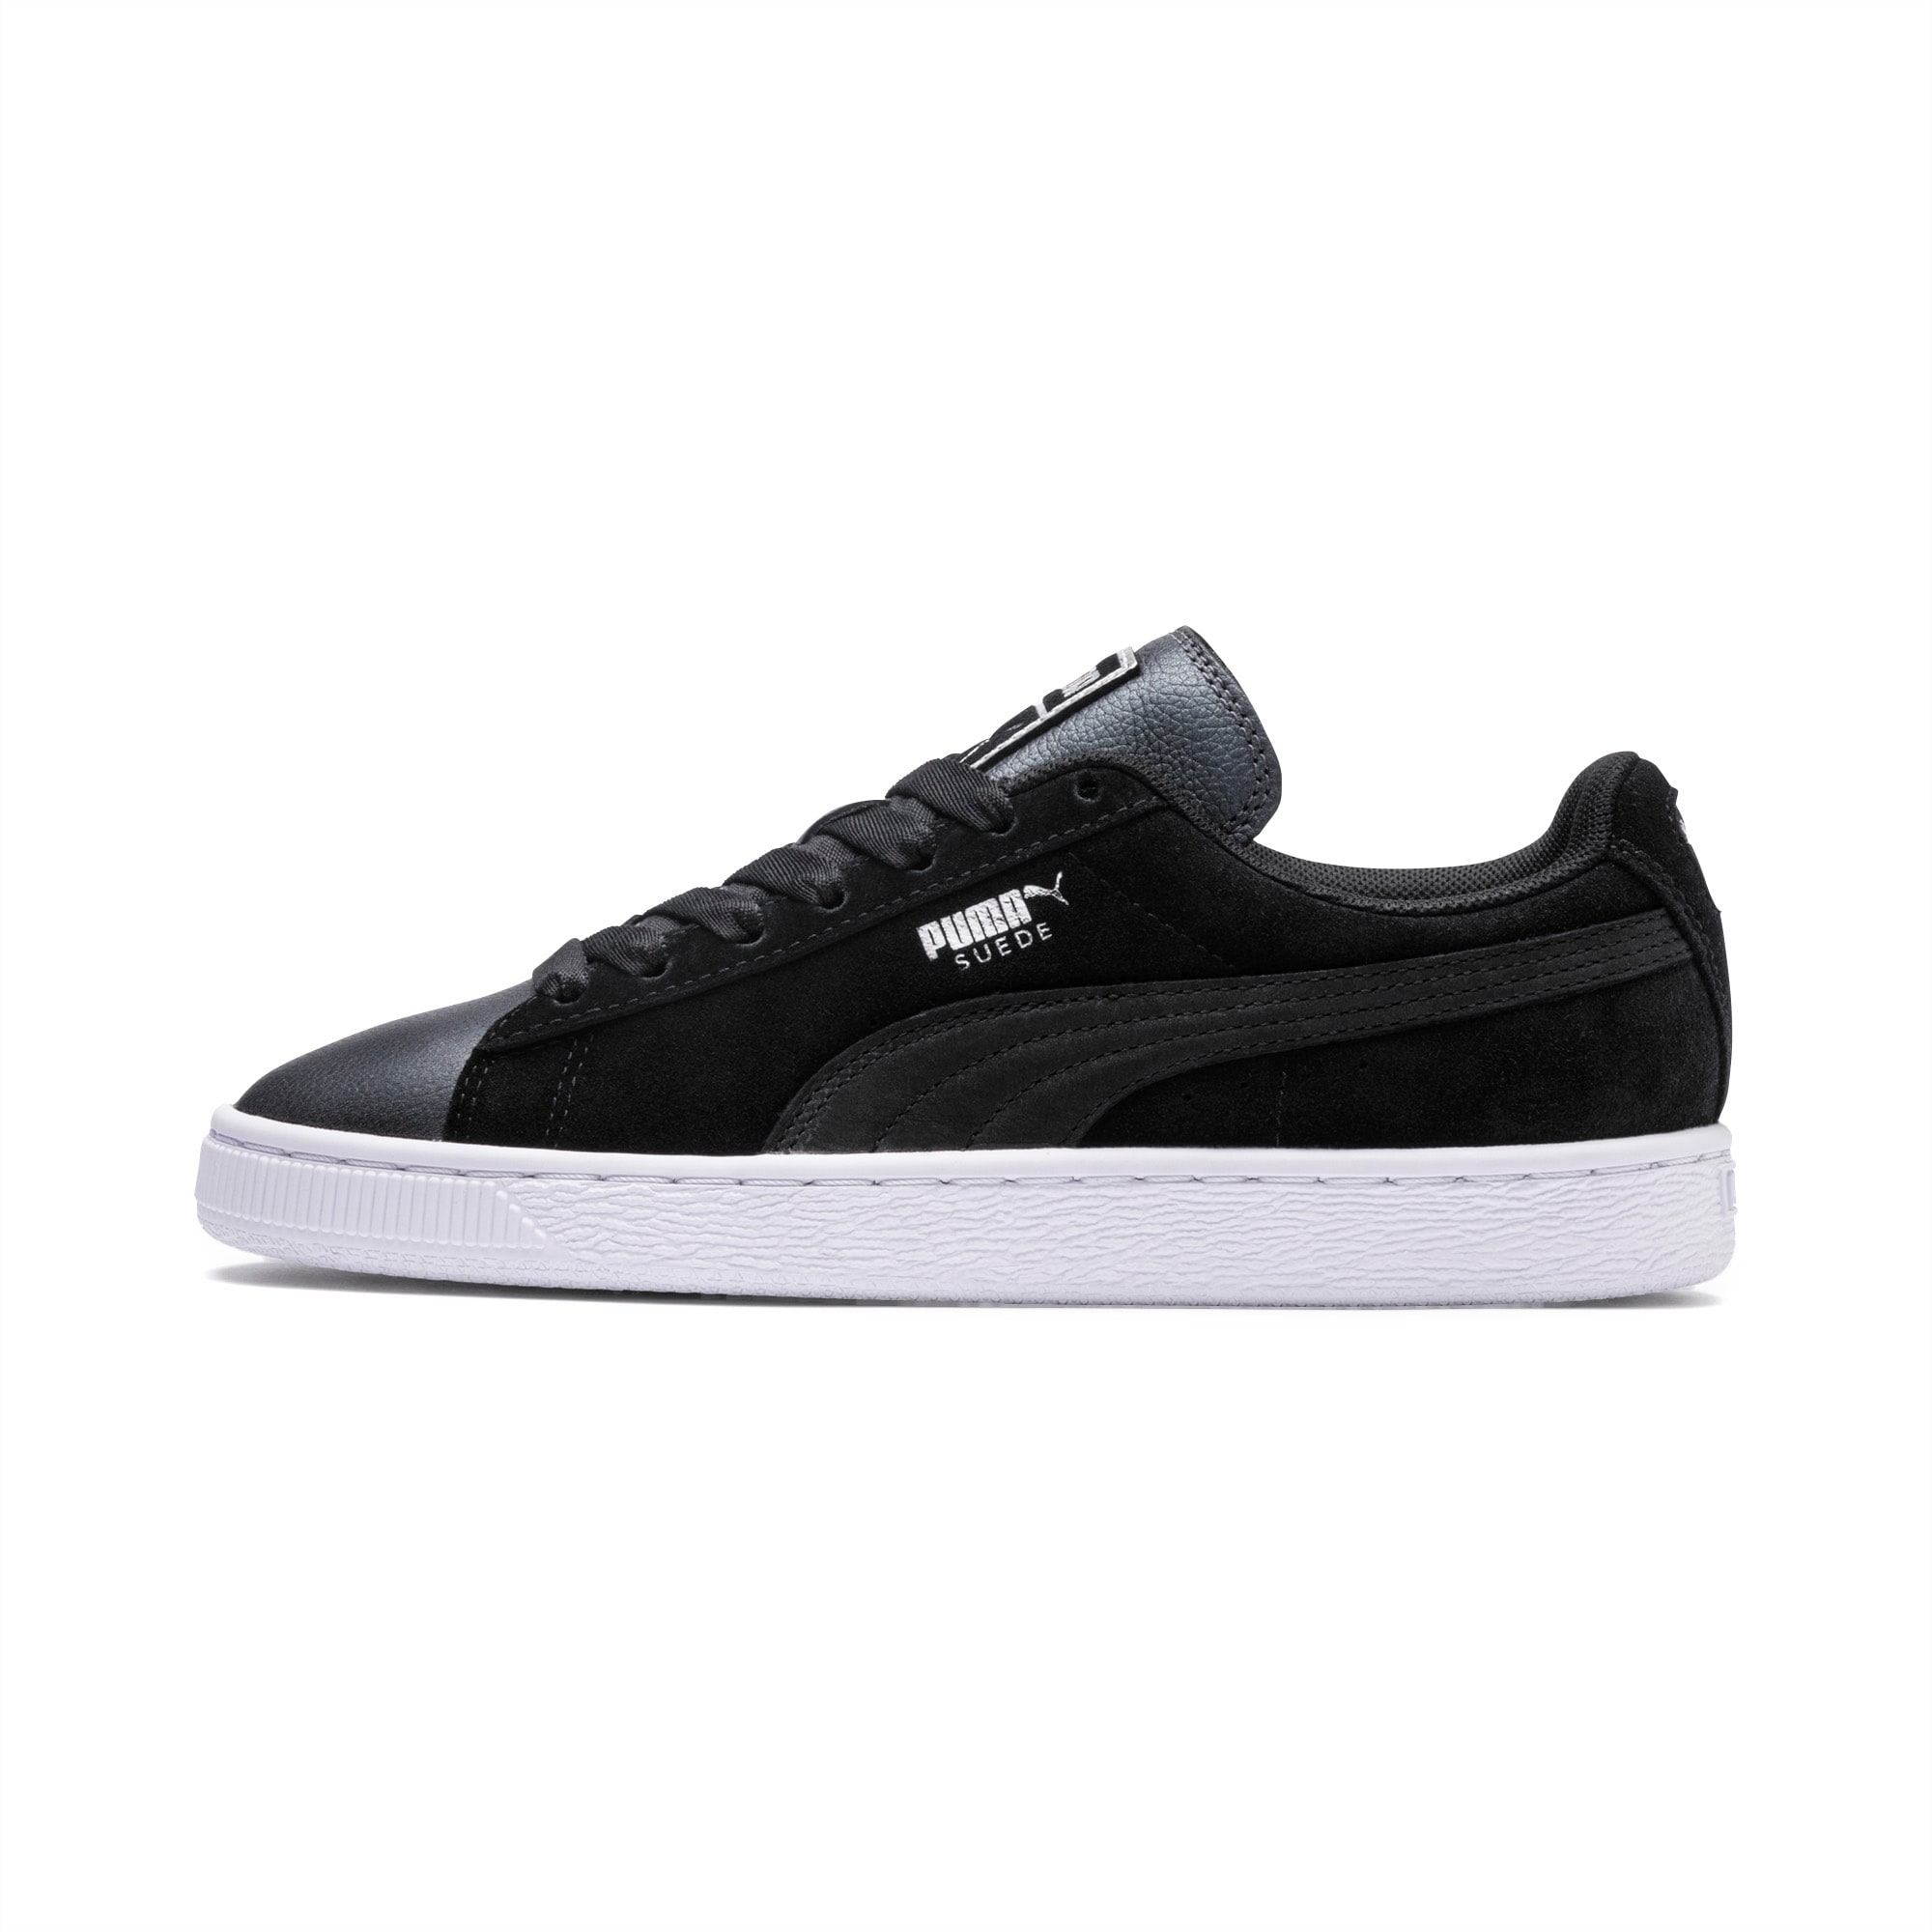 Suede Shimmer Women's Sneakers | PUMA US